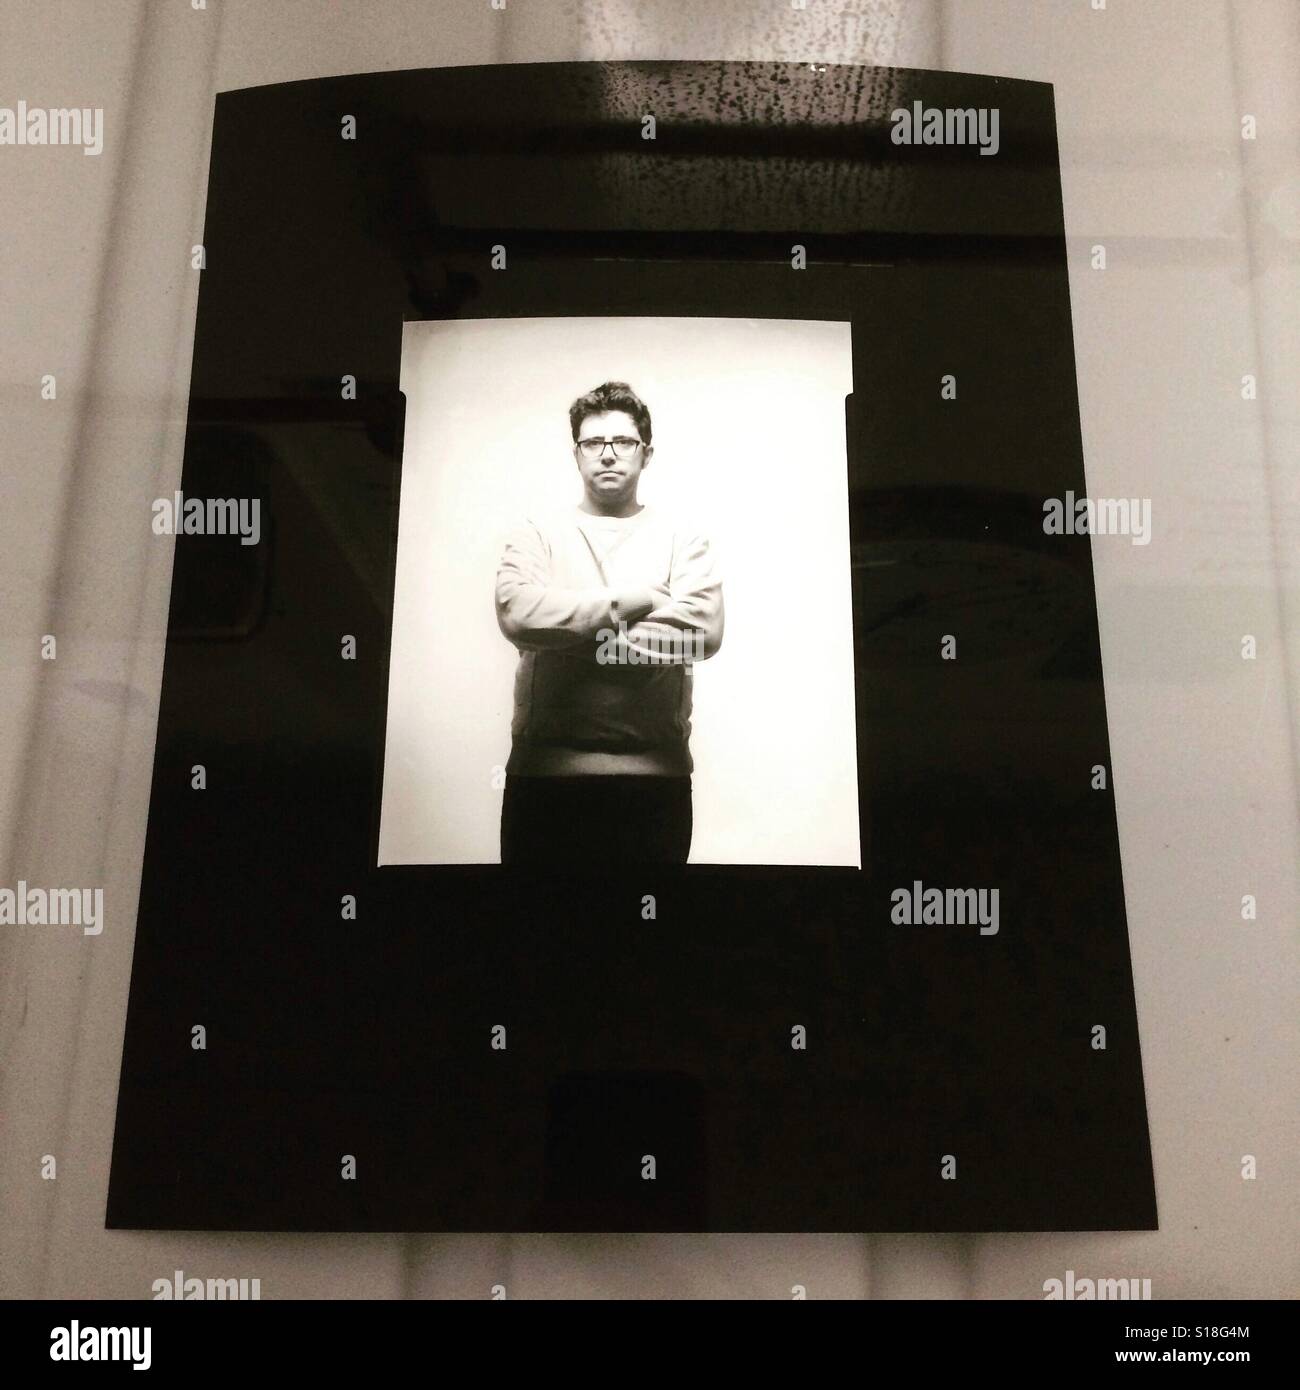 Black and white large format 5x4' self portrait photographic print, in the darkroom wash. Stock Photo